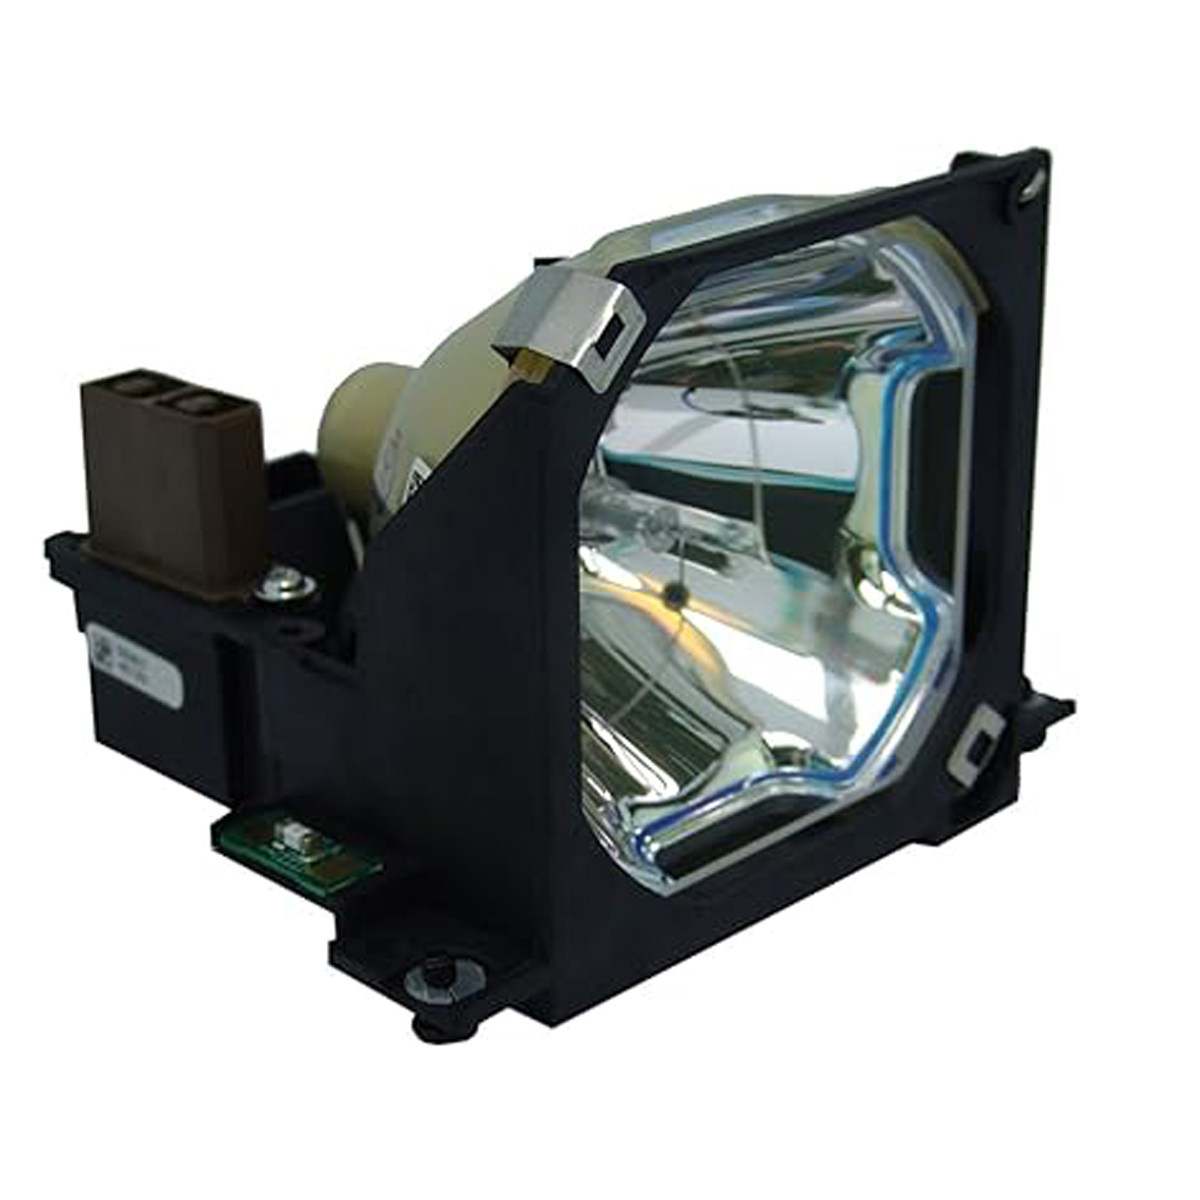 Replacement Projector lamp ELPLP08 For Epson EMP -8000 EMP-9000 EMP NLE PowerLite 8000i